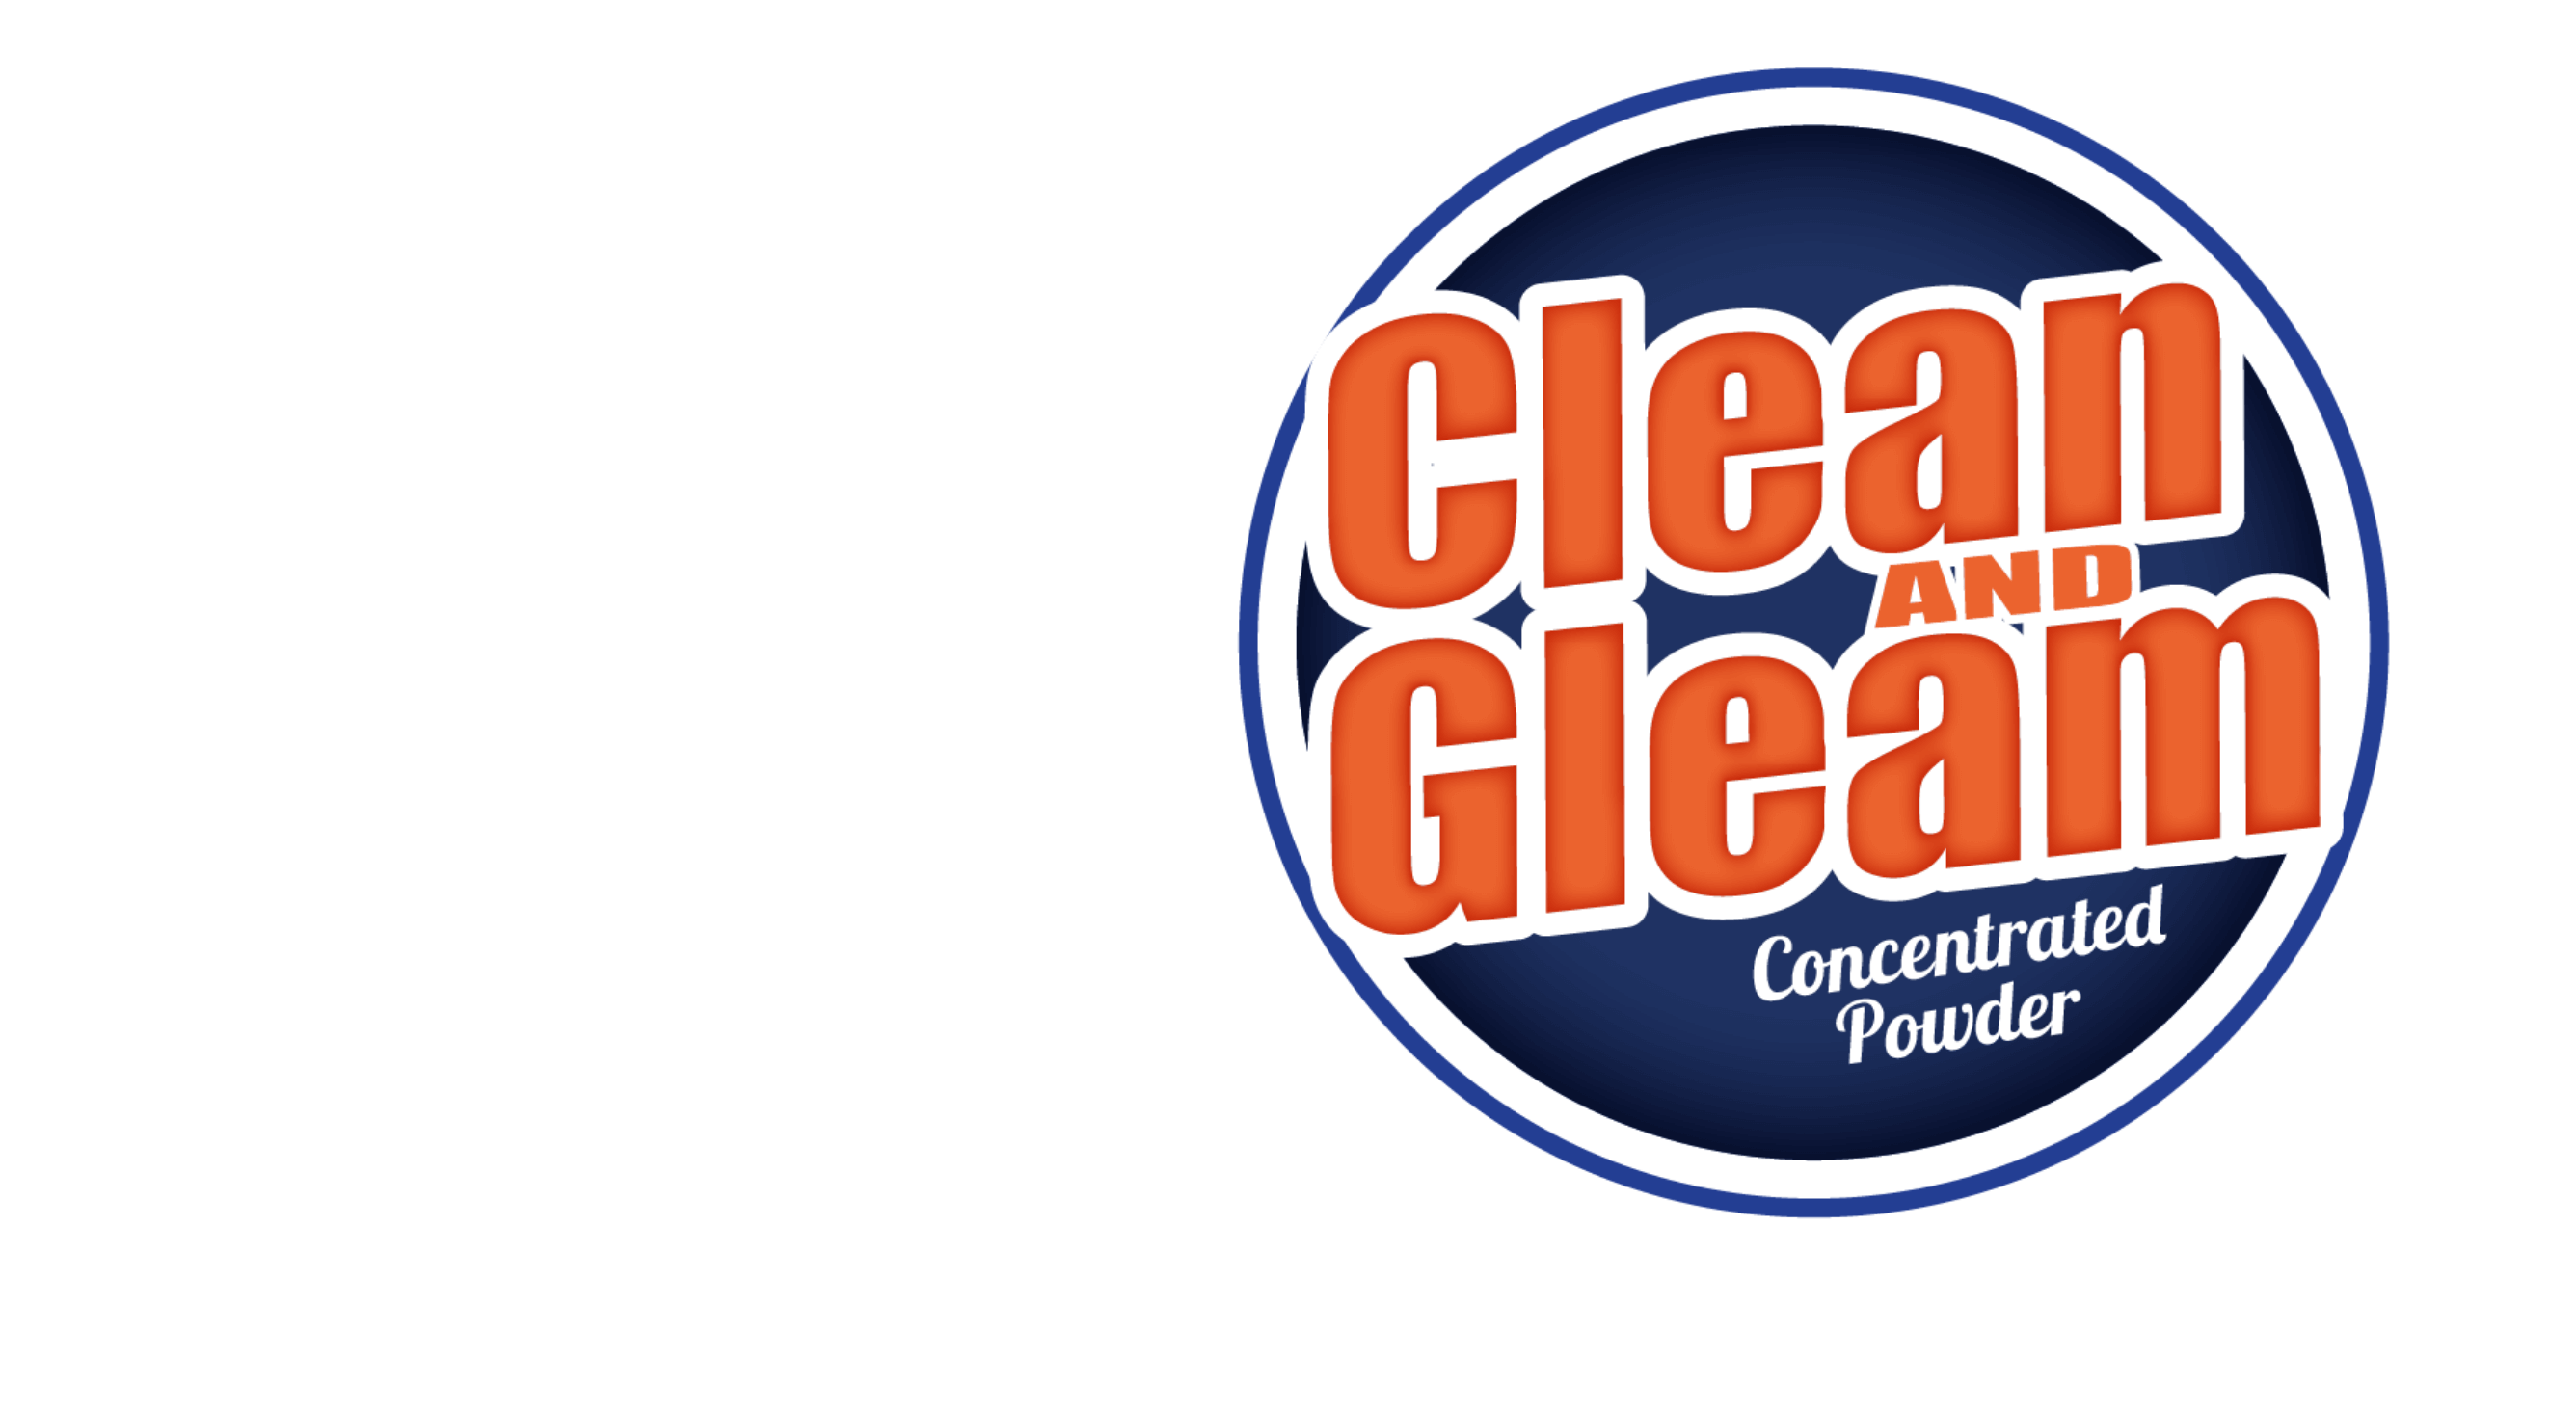 Challenge Yourself | Clean and Gleam